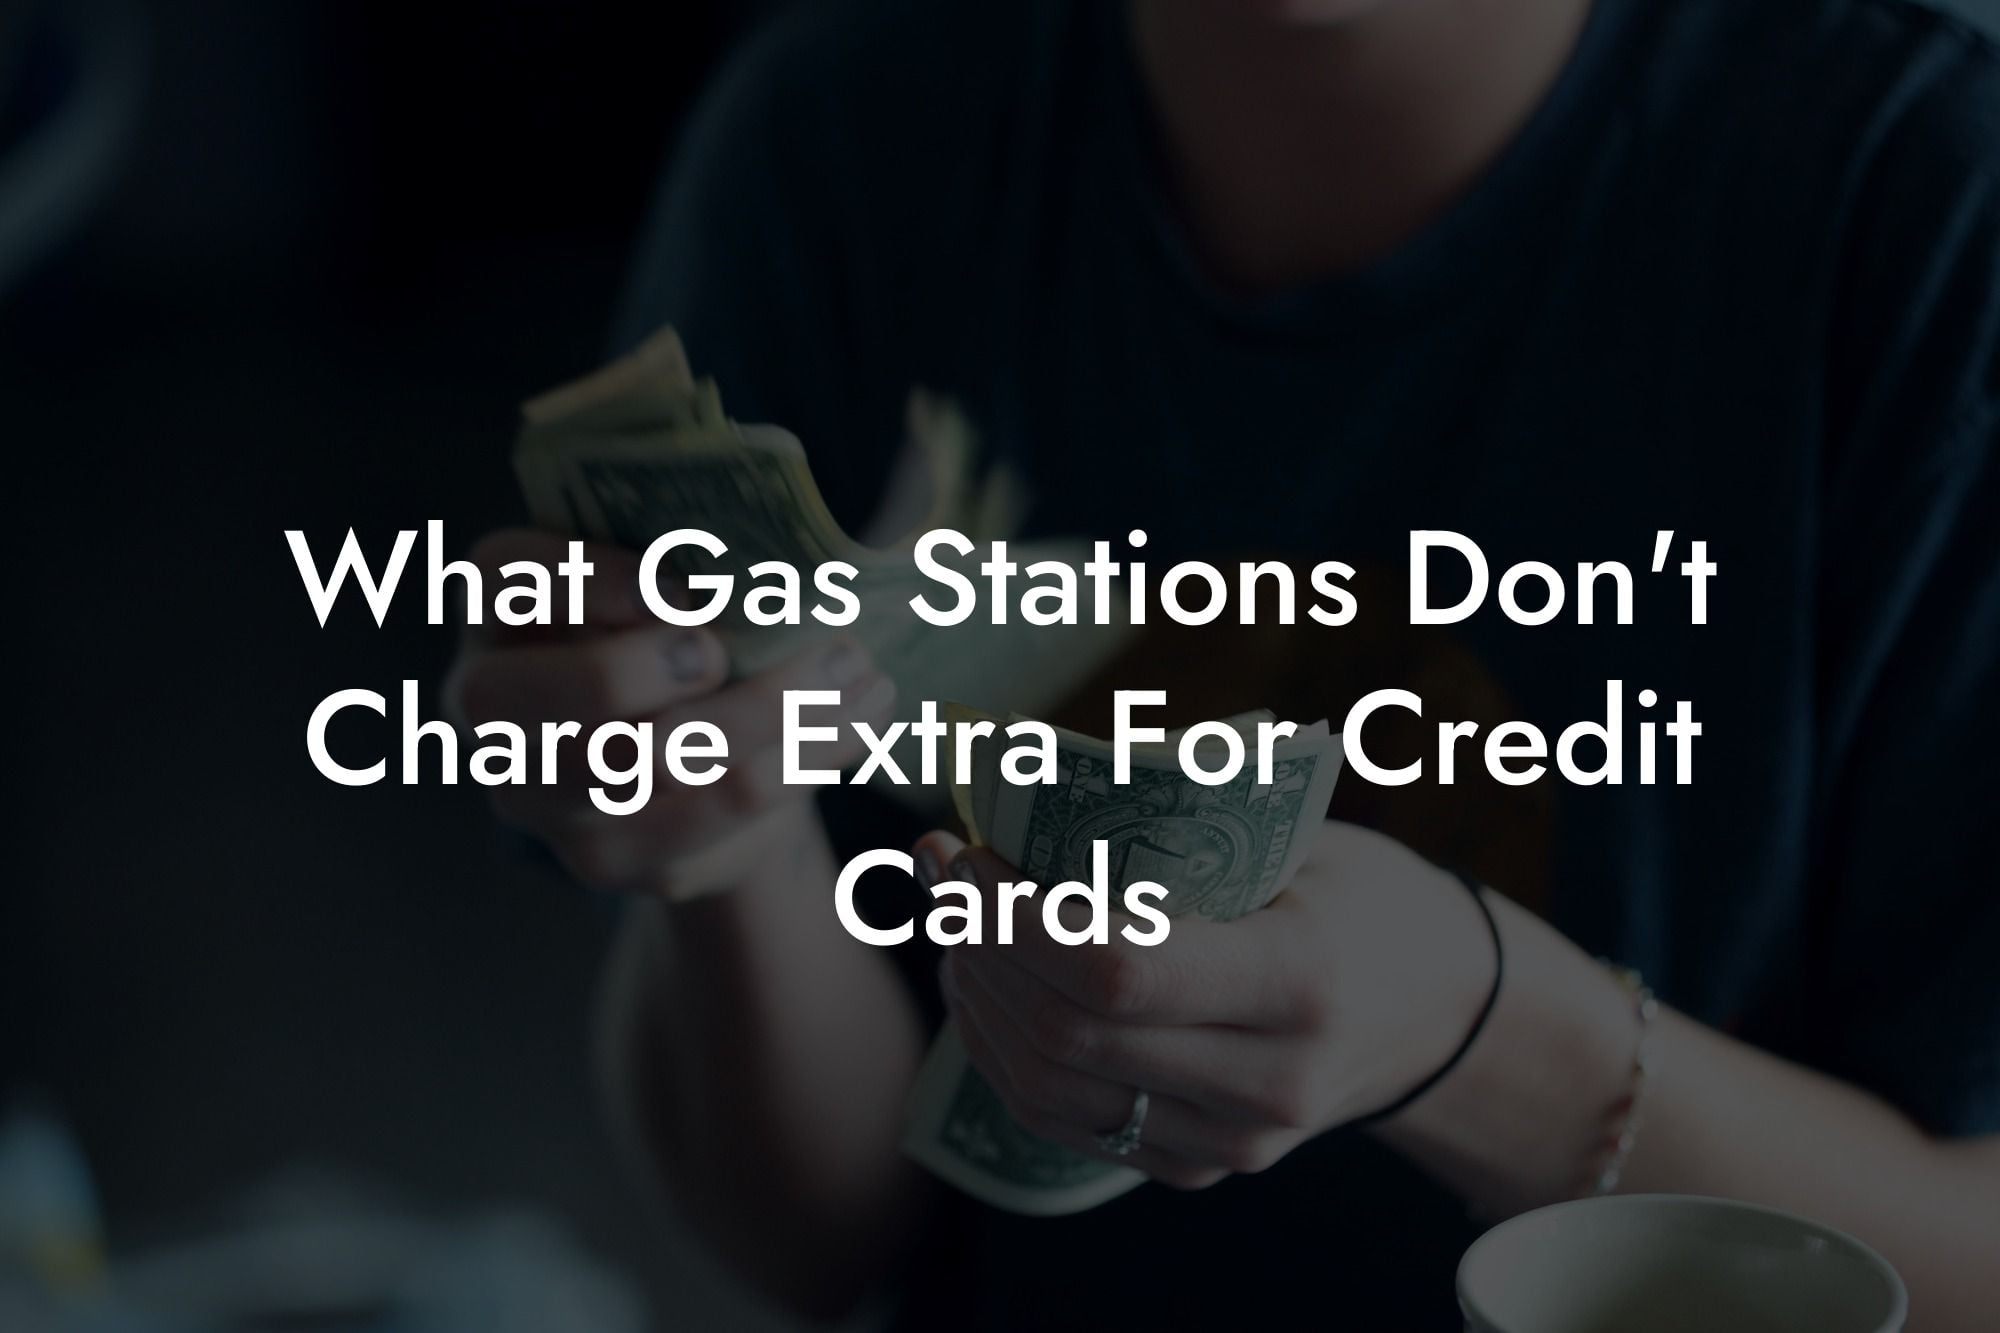 What Gas Stations Don't Charge Extra For Credit Cards